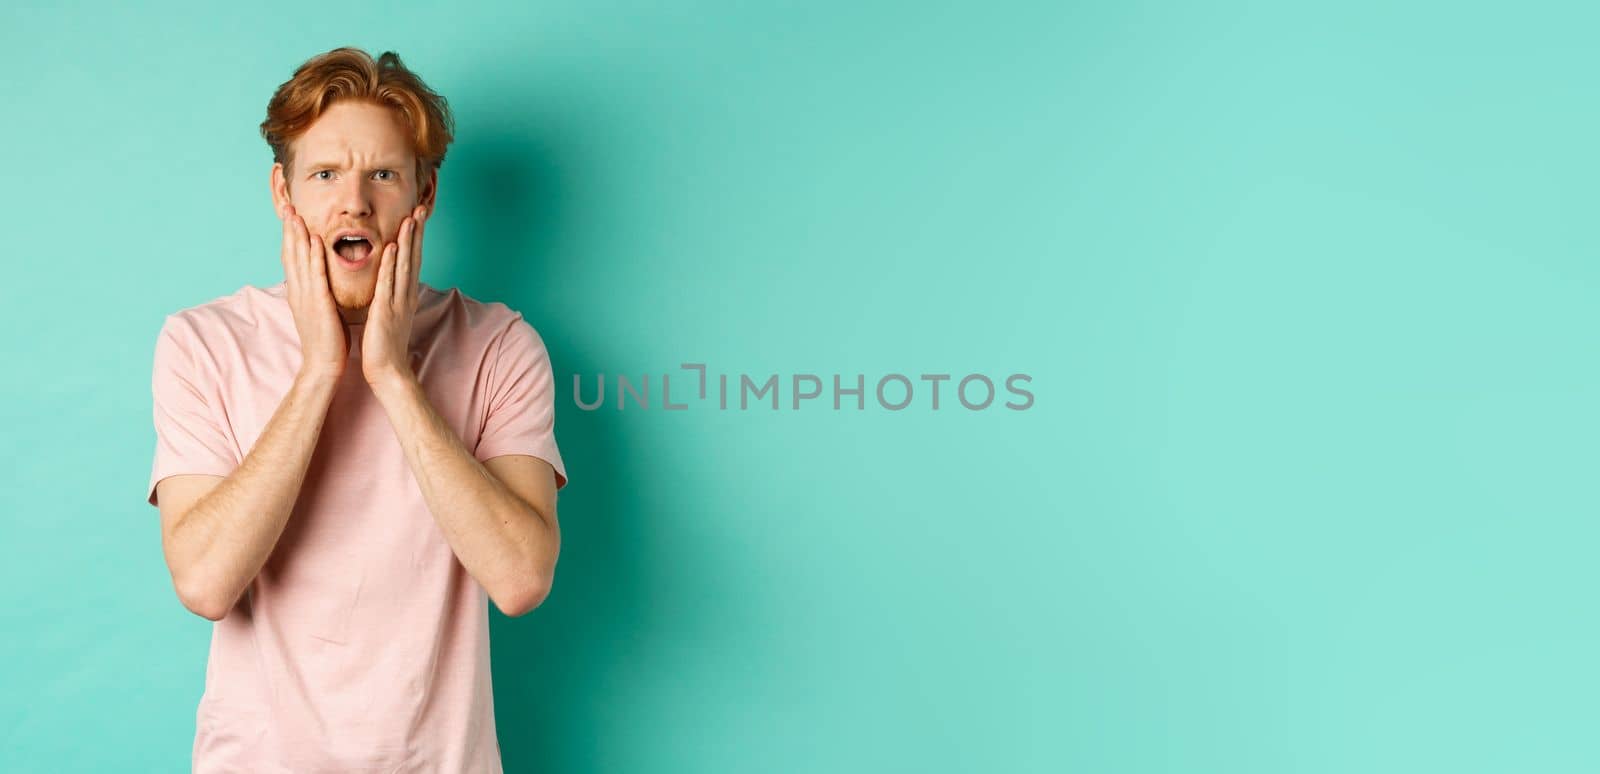 Shocked and concerned young man with red hair, staring at camera worried and touching face, standing in t-shirt against turquoise background.